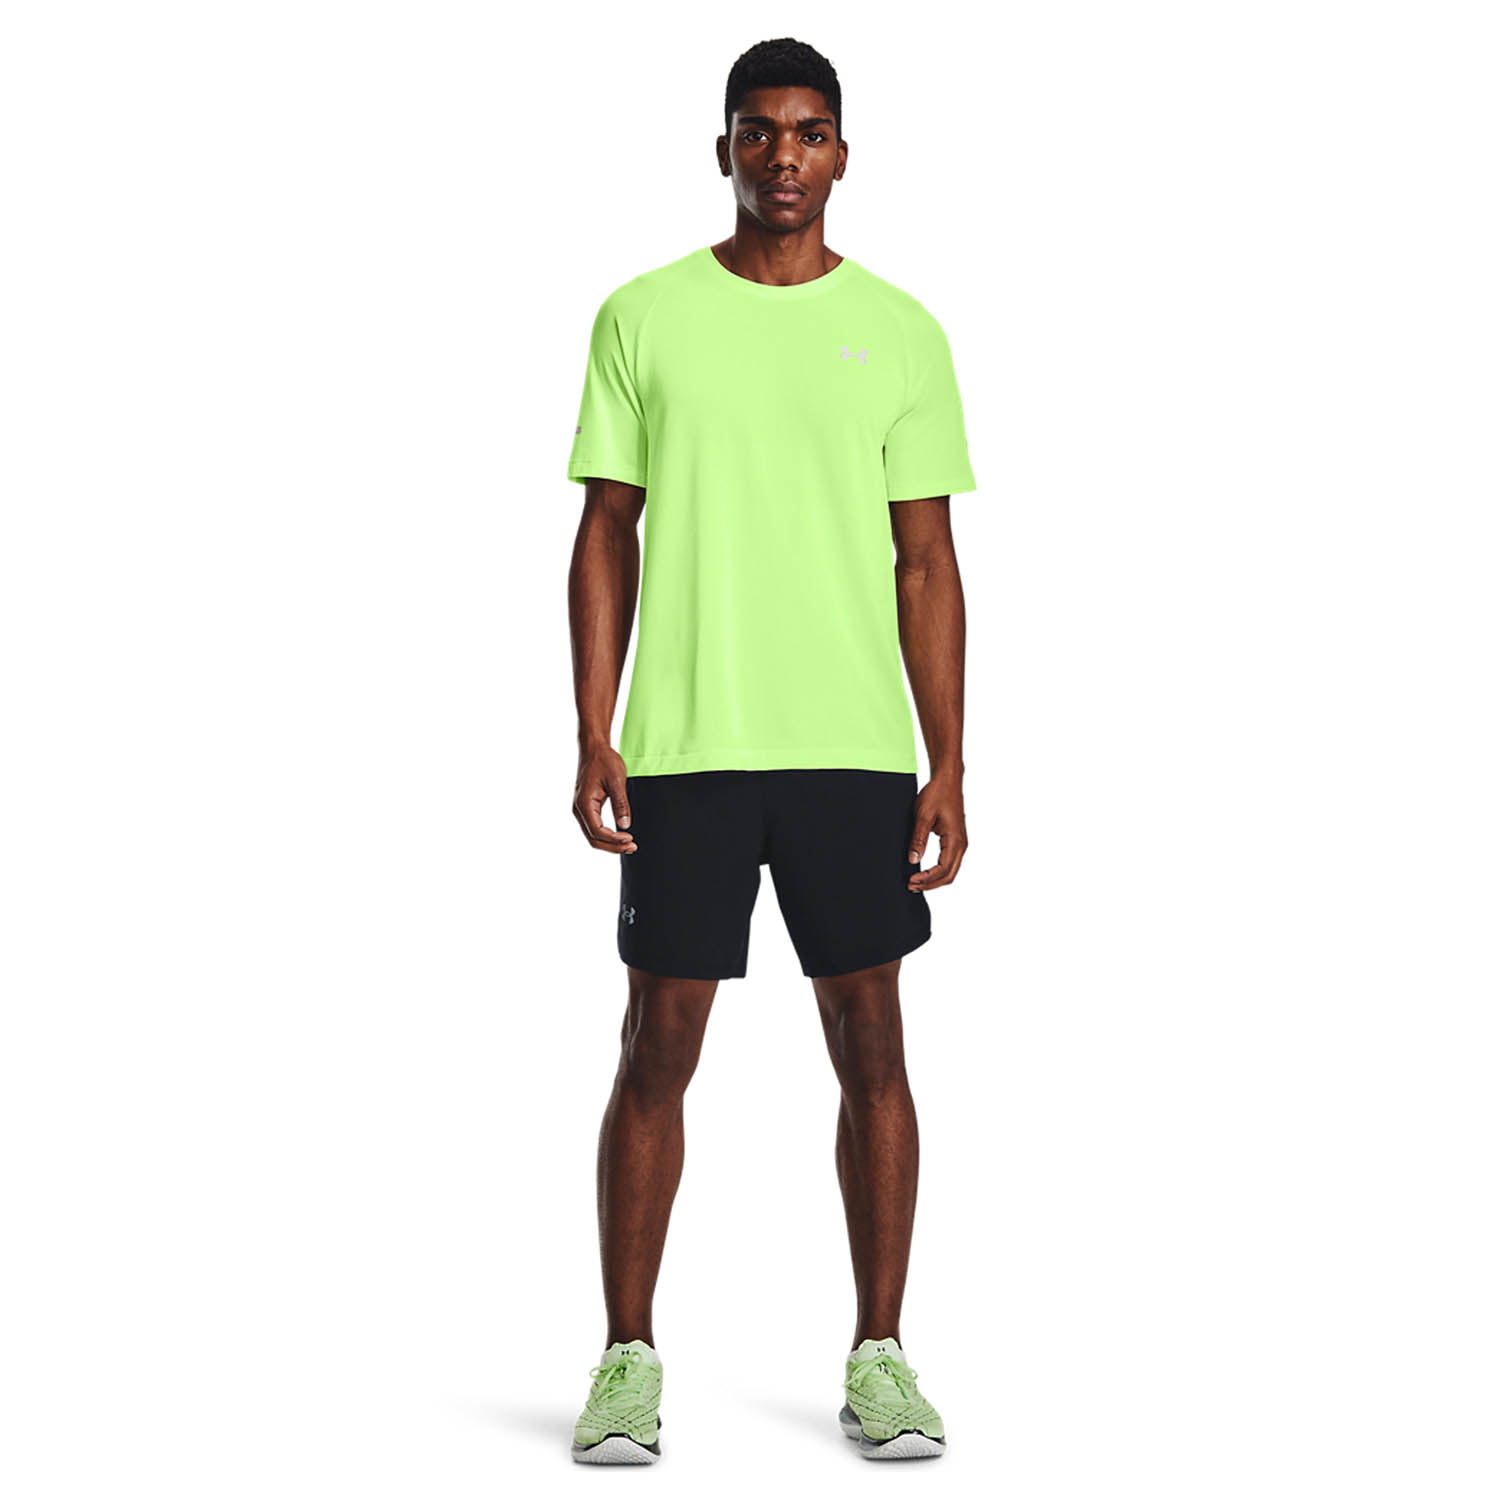 Under Armour Launch 2 in 1 7in Shorts - Black/Reflective